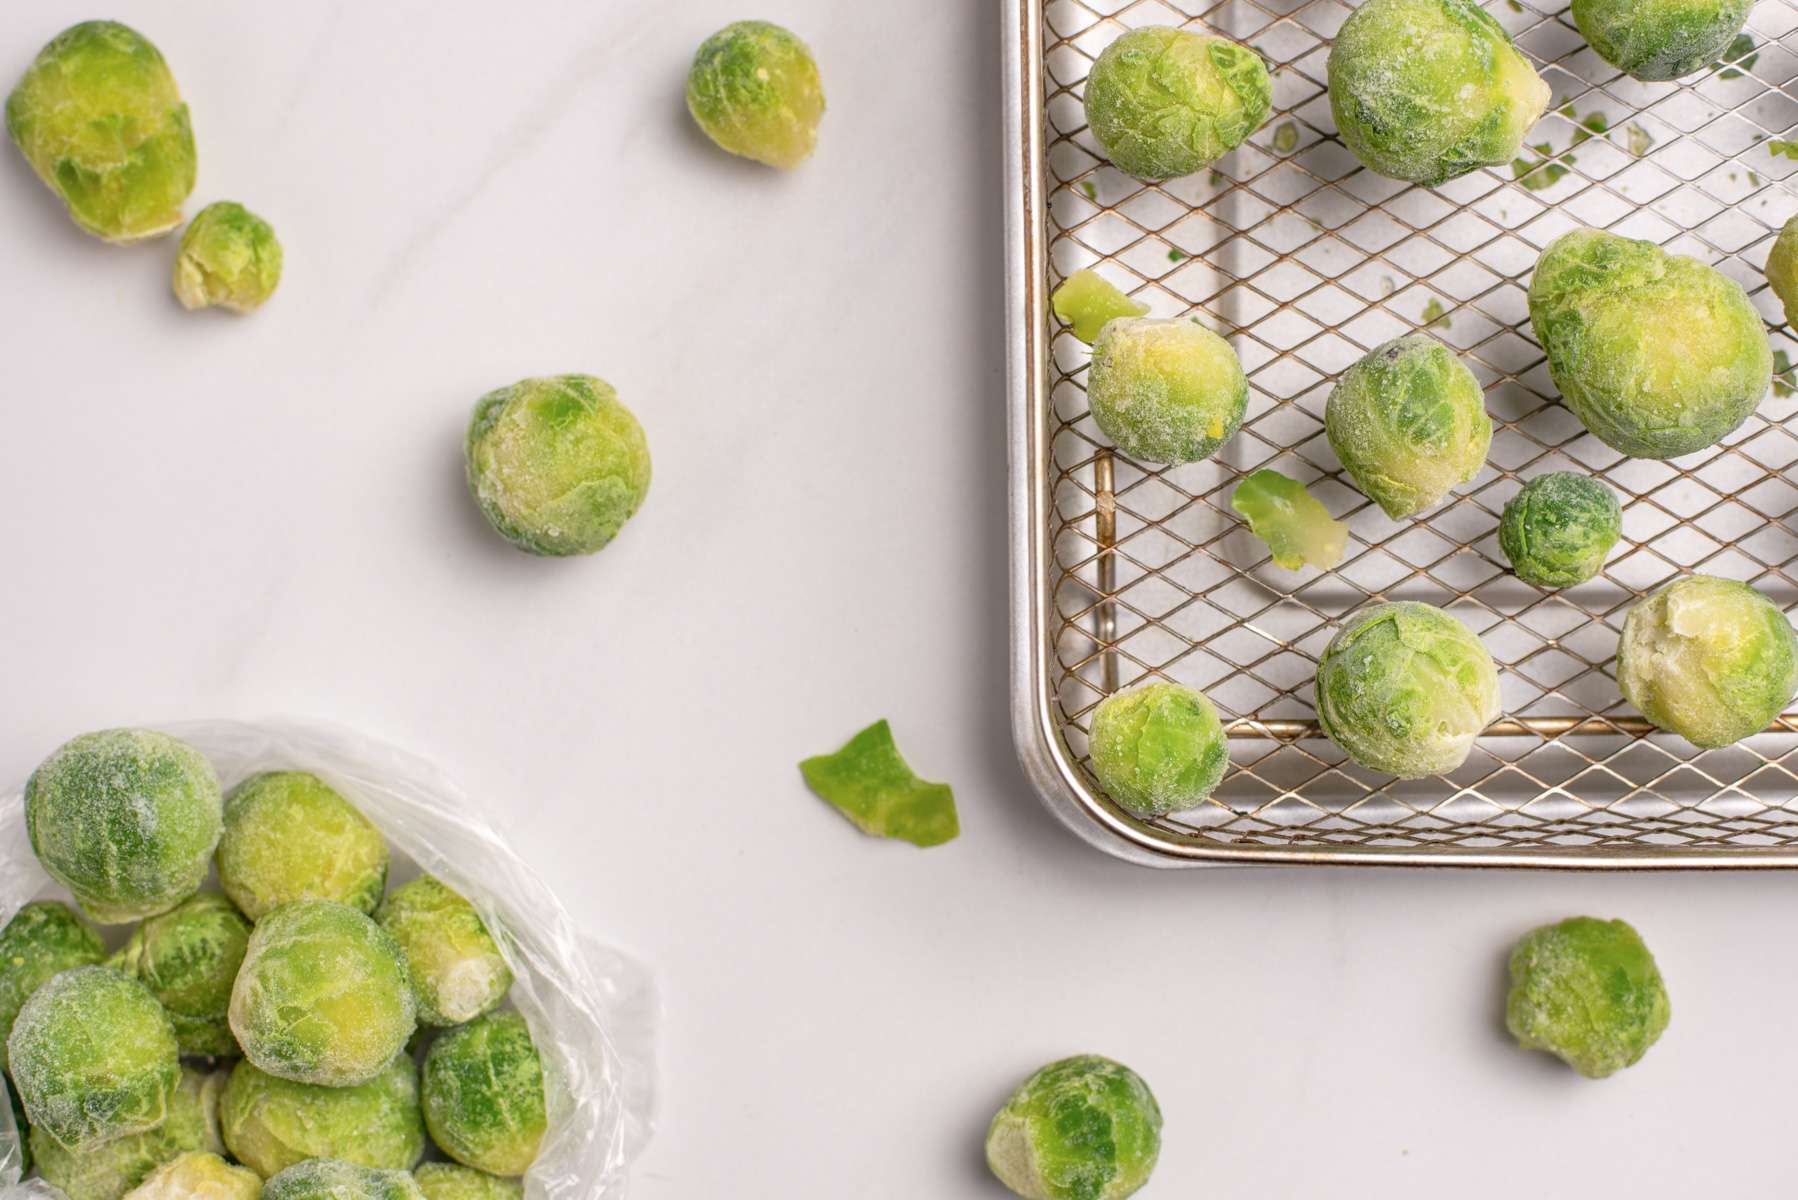 frozen brussels sprouts on air fryer tray